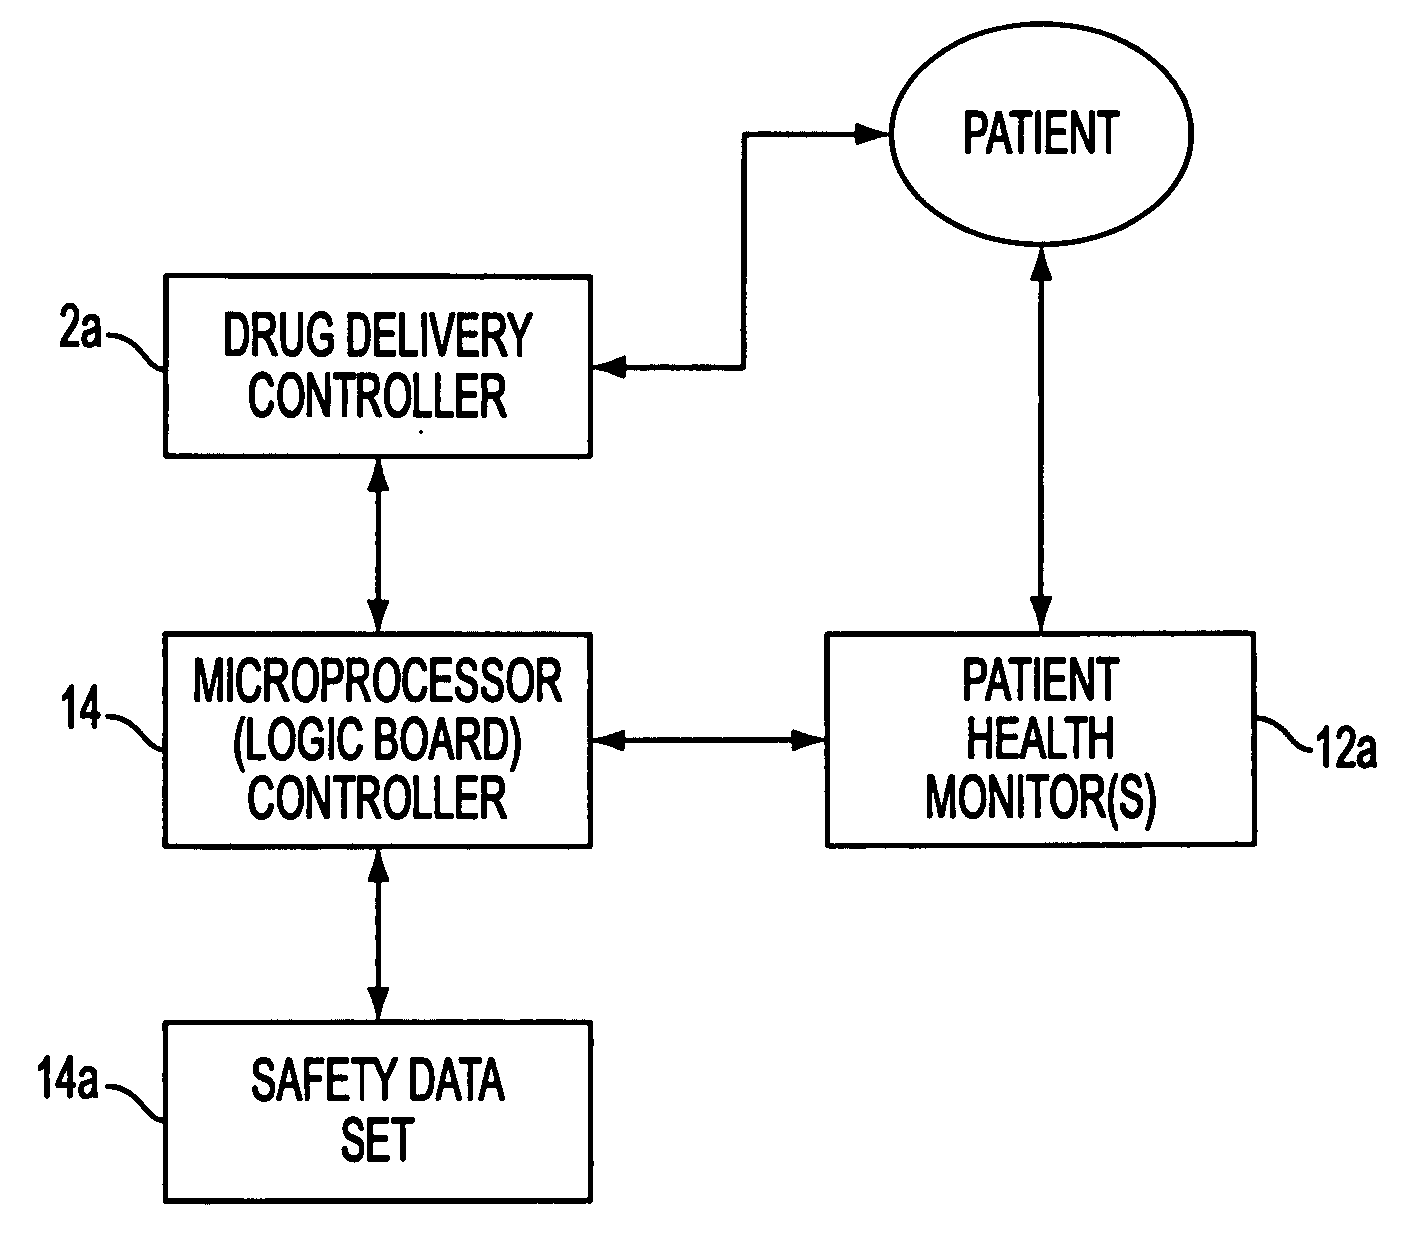 Apparatus for drug delivery in association with medical or surgical procedures